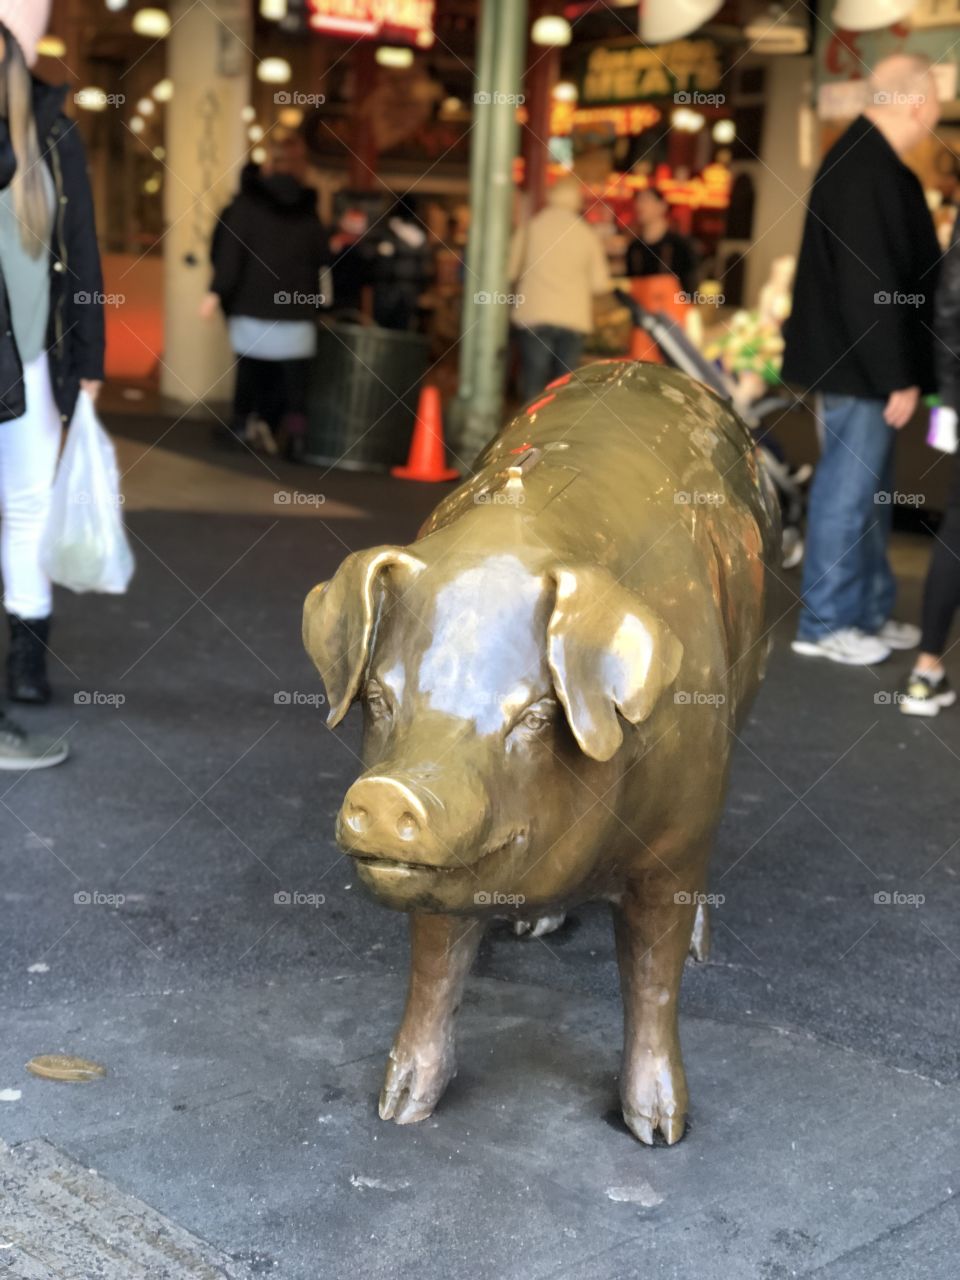 Pike Place Market Pig